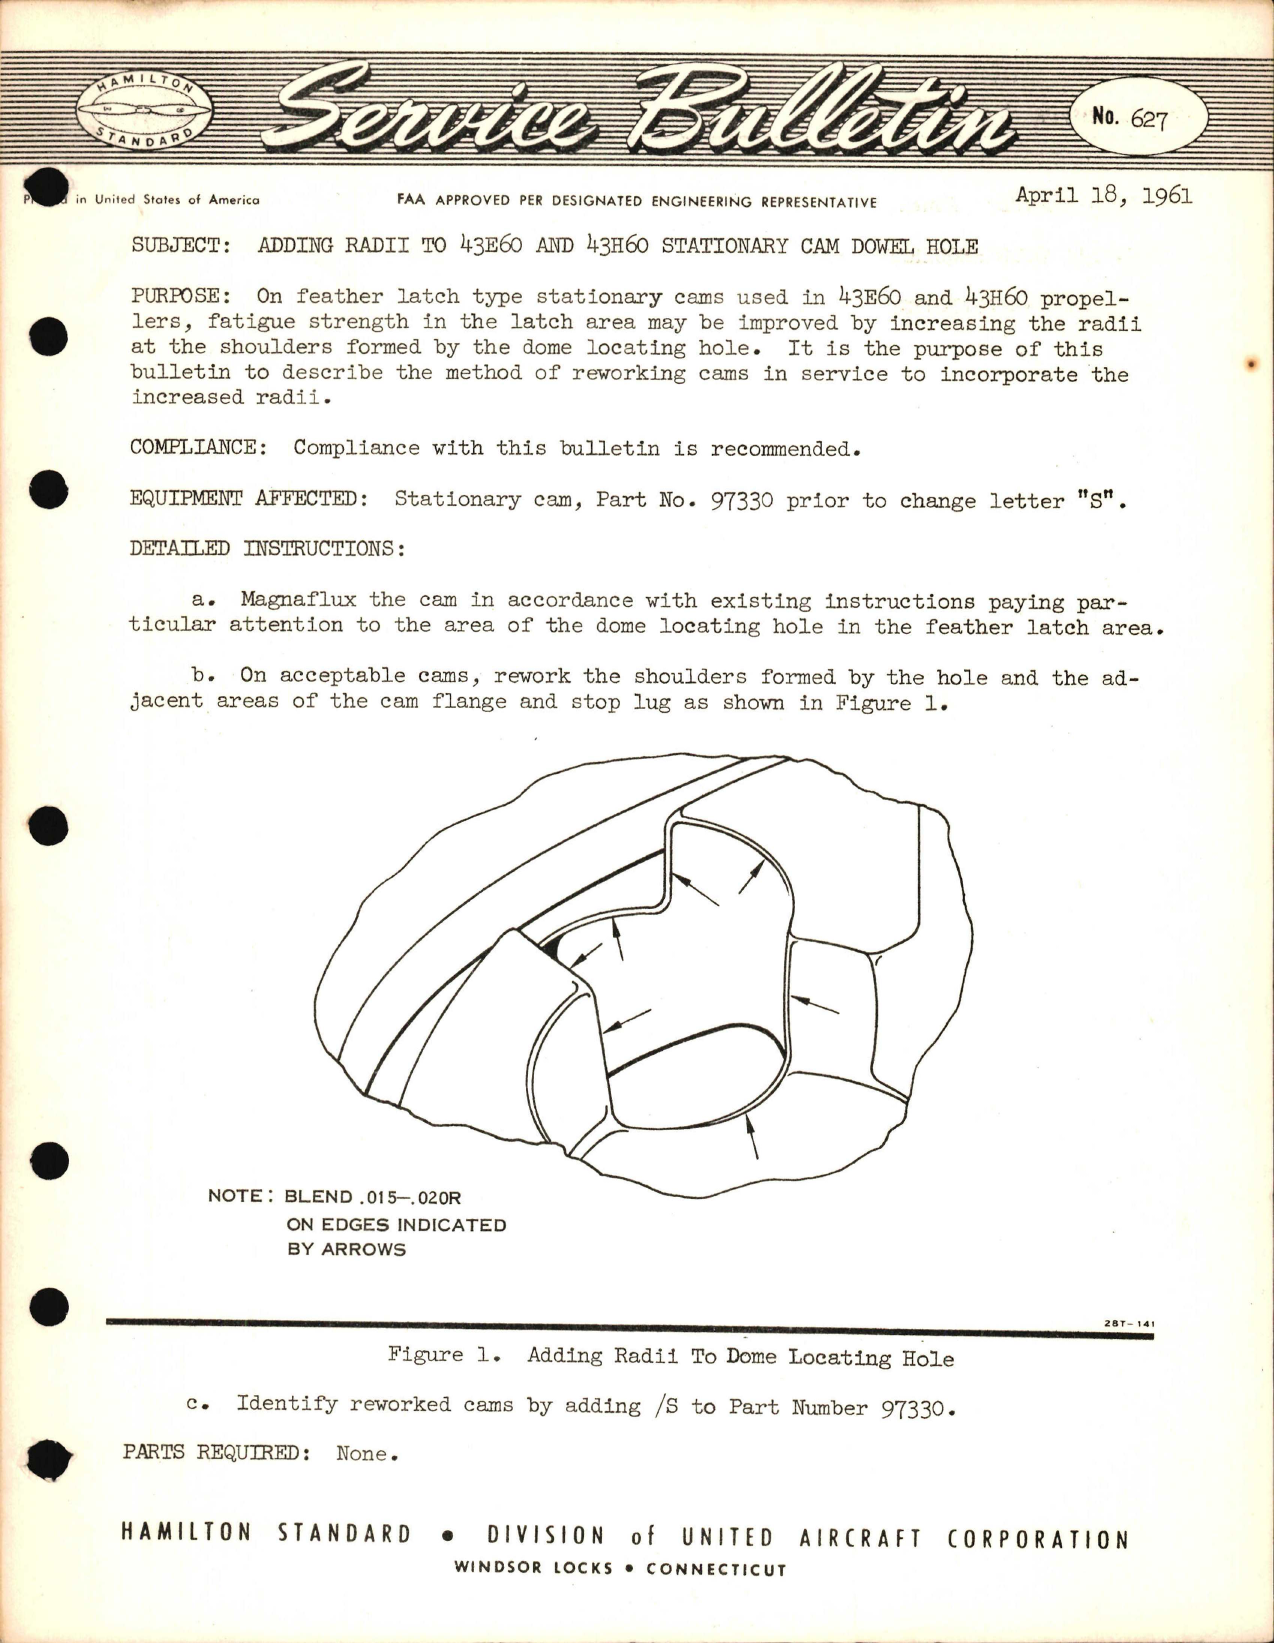 Sample page 1 from AirCorps Library document: Adding Radii to 43E60 and 43H60 Stationary Cam Dowel Hole